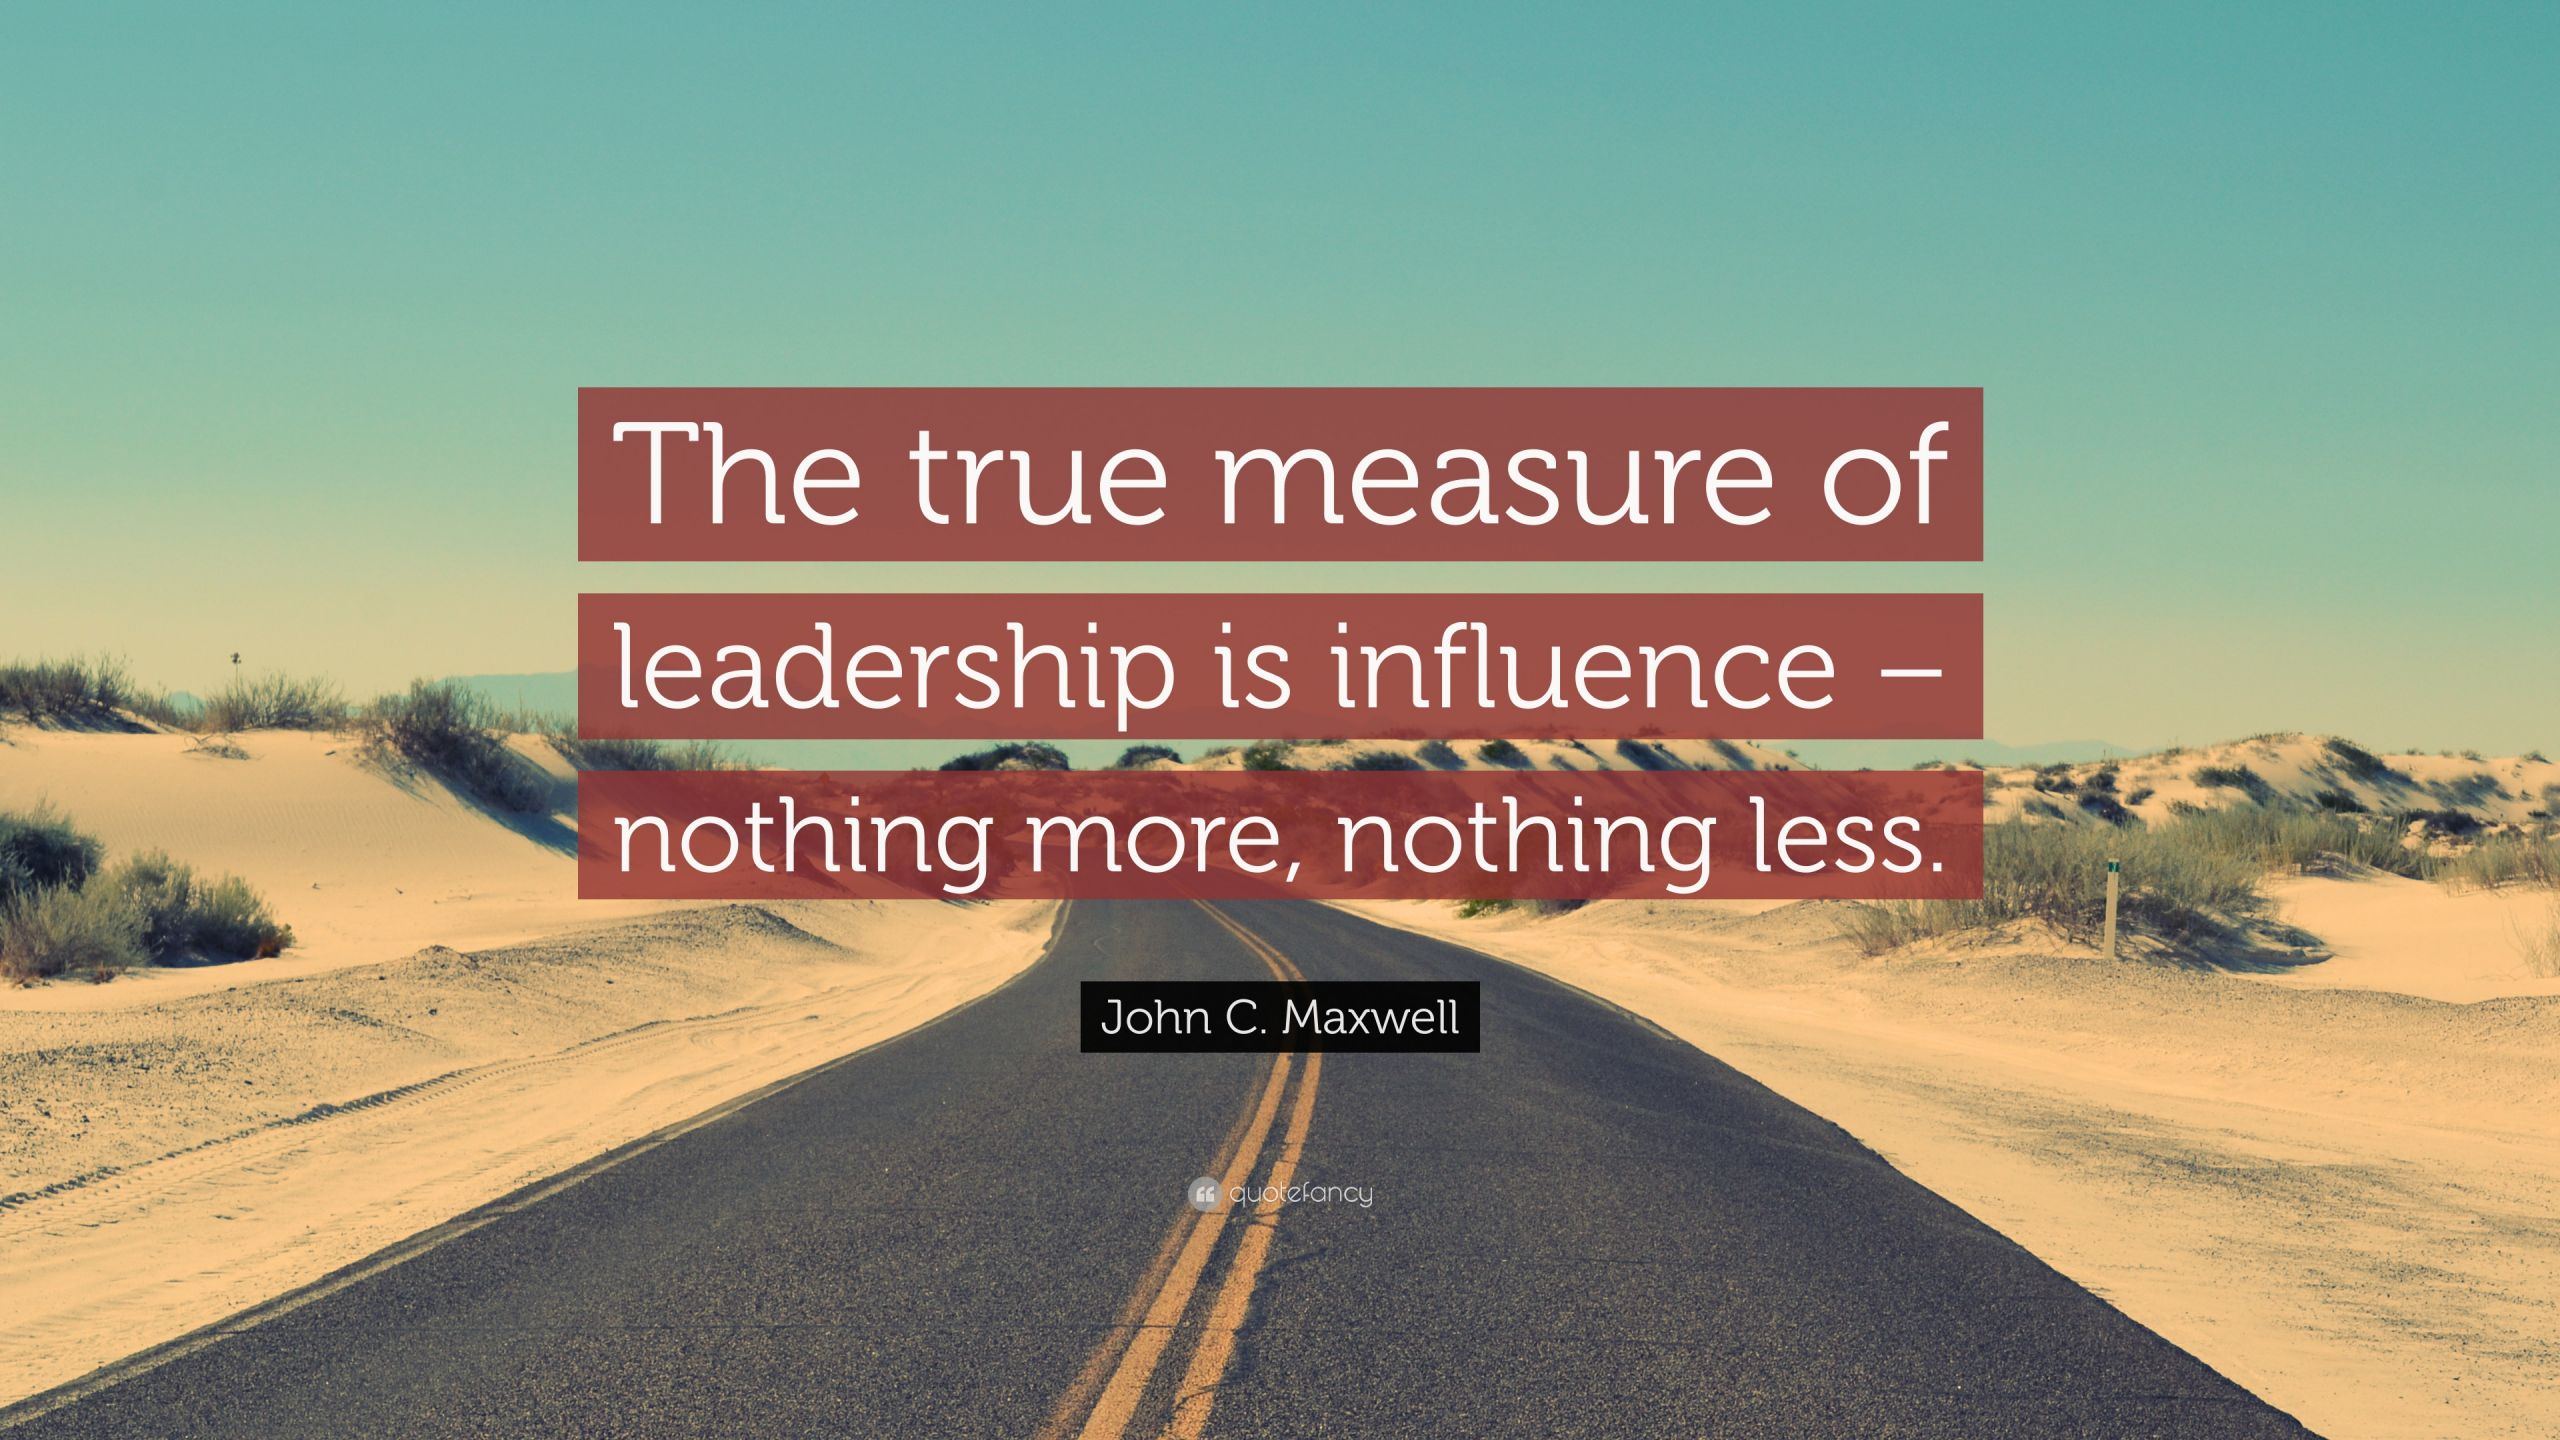 Leadership Is Influence Quote
 John C Maxwell Quote “The true measure of leadership is